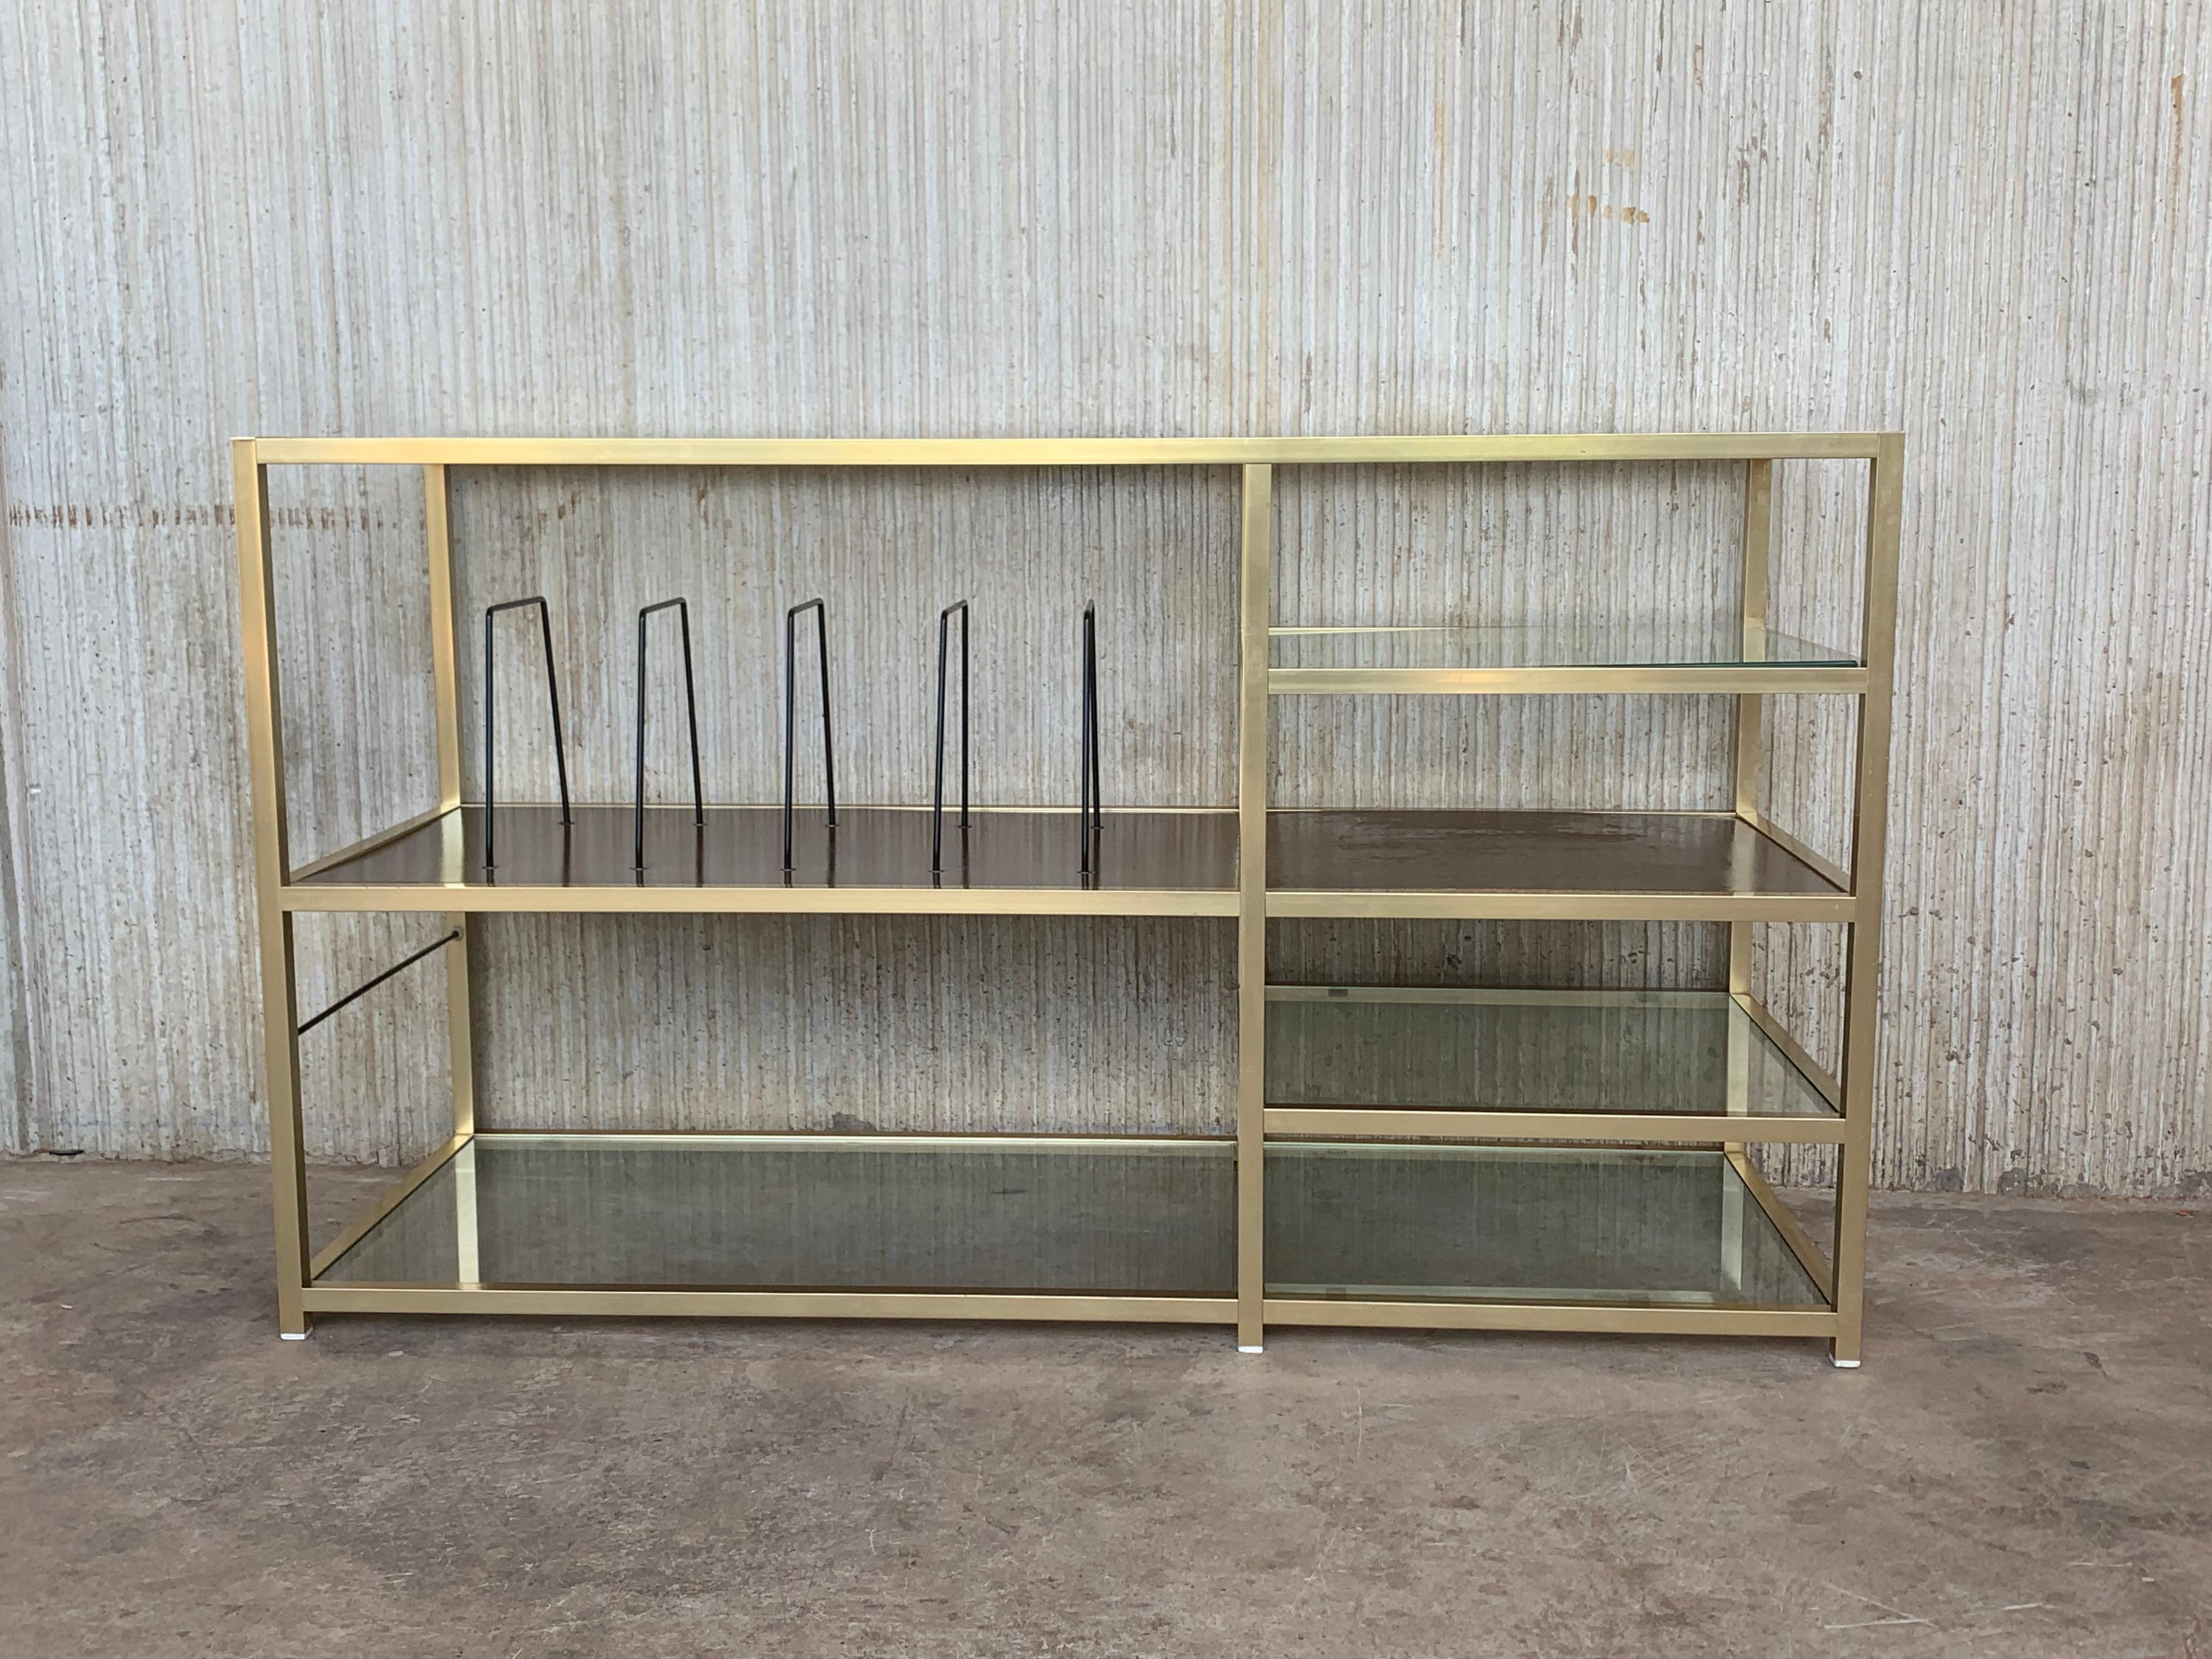 Brass console or étagère with glass shelves and vertical record album / book storage. The brass is bright and in good condition. 
 